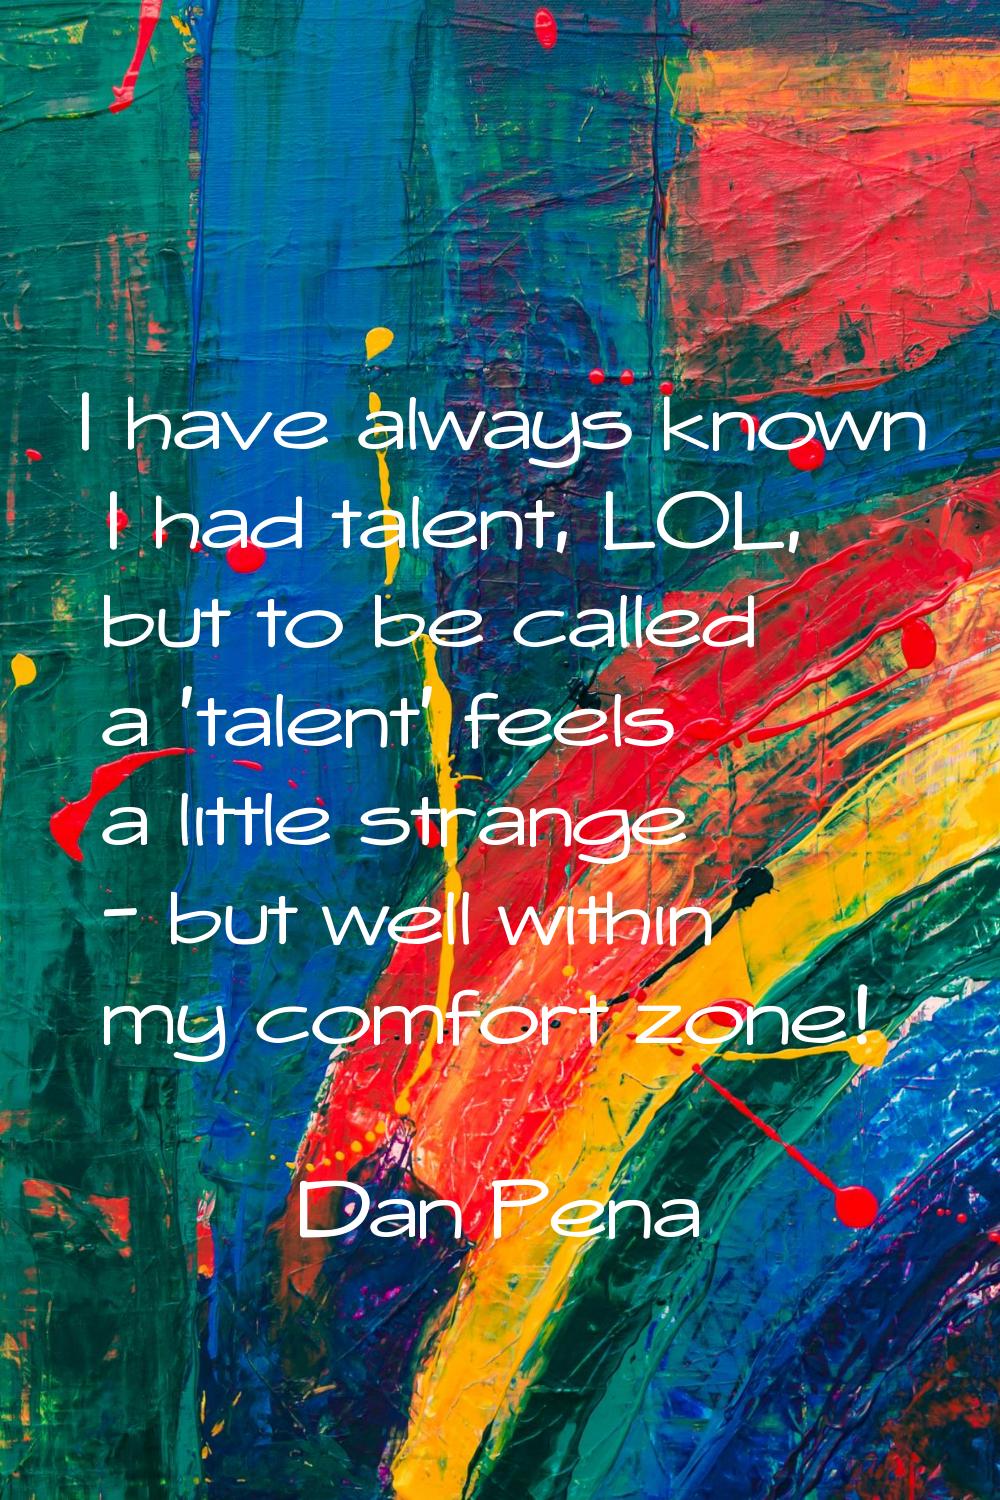 I have always known I had talent, LOL, but to be called a 'talent' feels a little strange - but wel